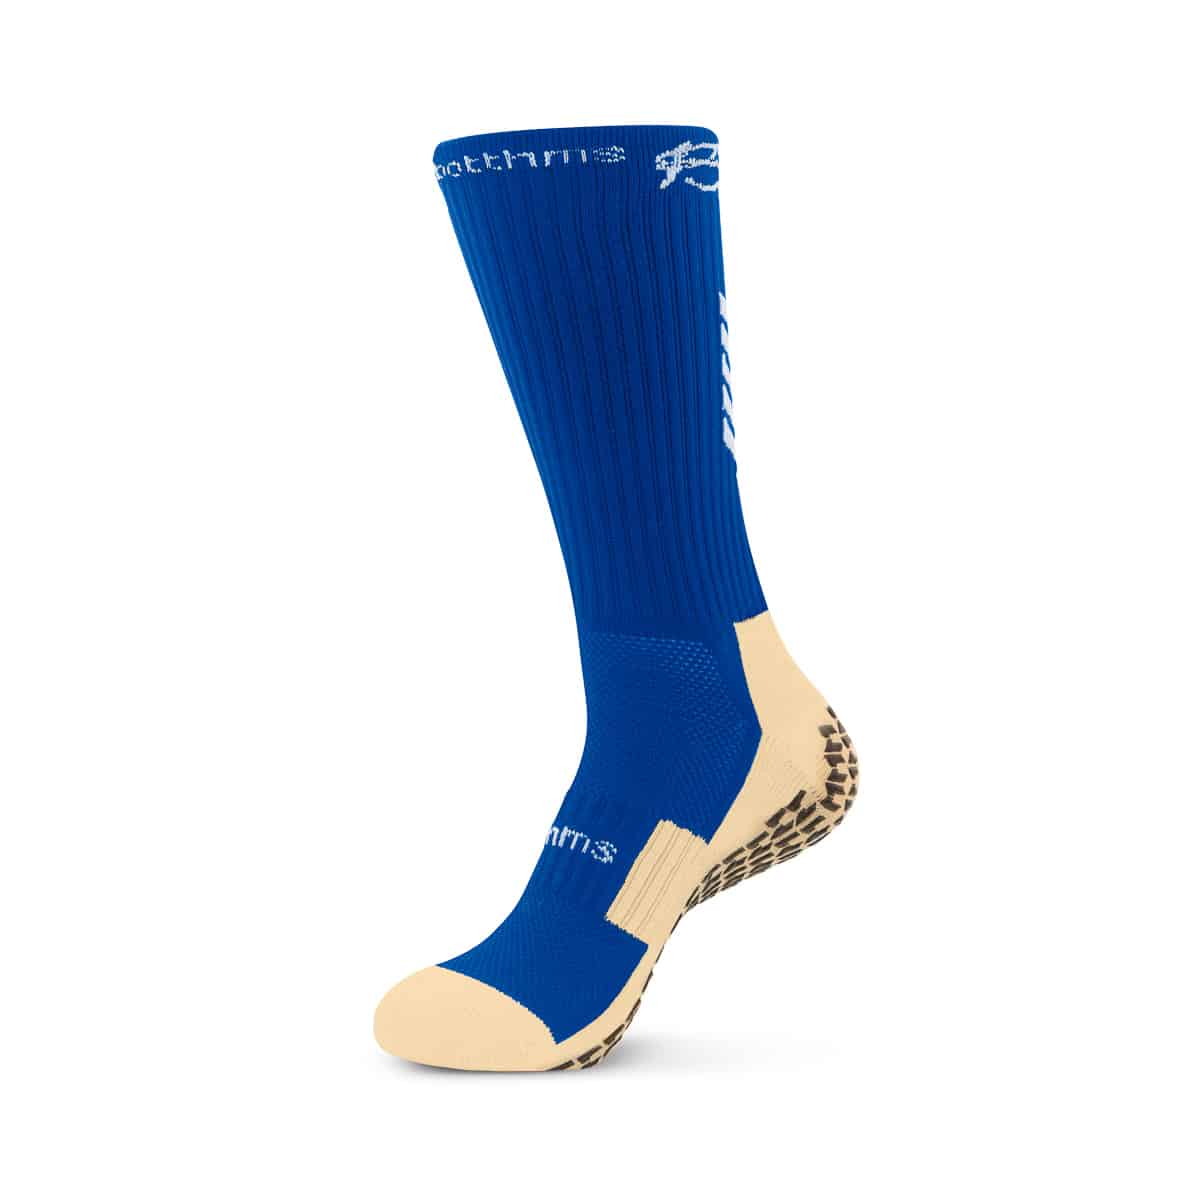 products/BOTTHMS_GRIP_SOCK_BLU_3069.jpgproducts/BOTTHMS_GRIP_SOCK_BLU_3062.jpgproducts/BOTTHMS_GRIP_SOCK_BLU_3070.jpgproducts/BOTTHMS_GRIP_SOCK_BLU_3069_detail.jpgproducts/BOTTHMS_GRIP_SOCK_BLU_3062_Detail.jpg